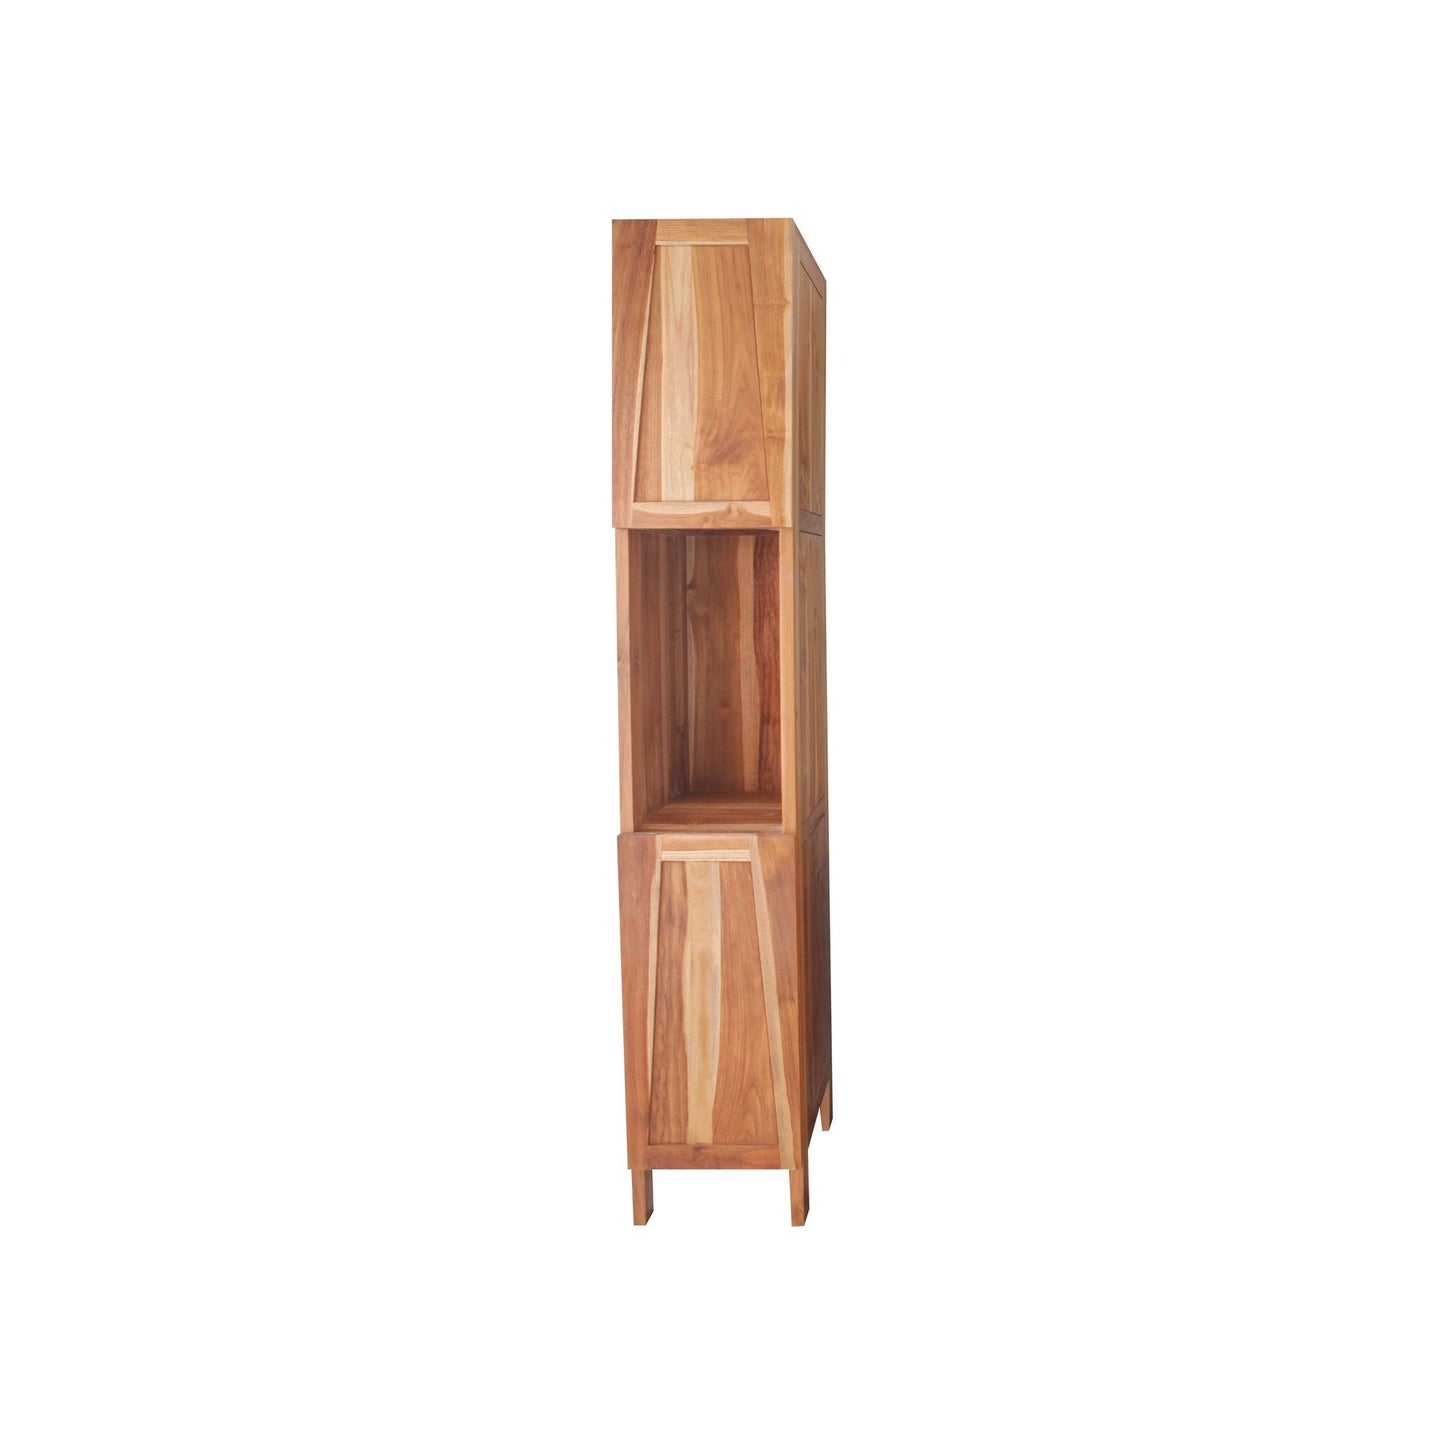 EcoDecors Significado 79" EarthyTeak Solid Teak Wood Fully Assembled Freestanding Linen Tower